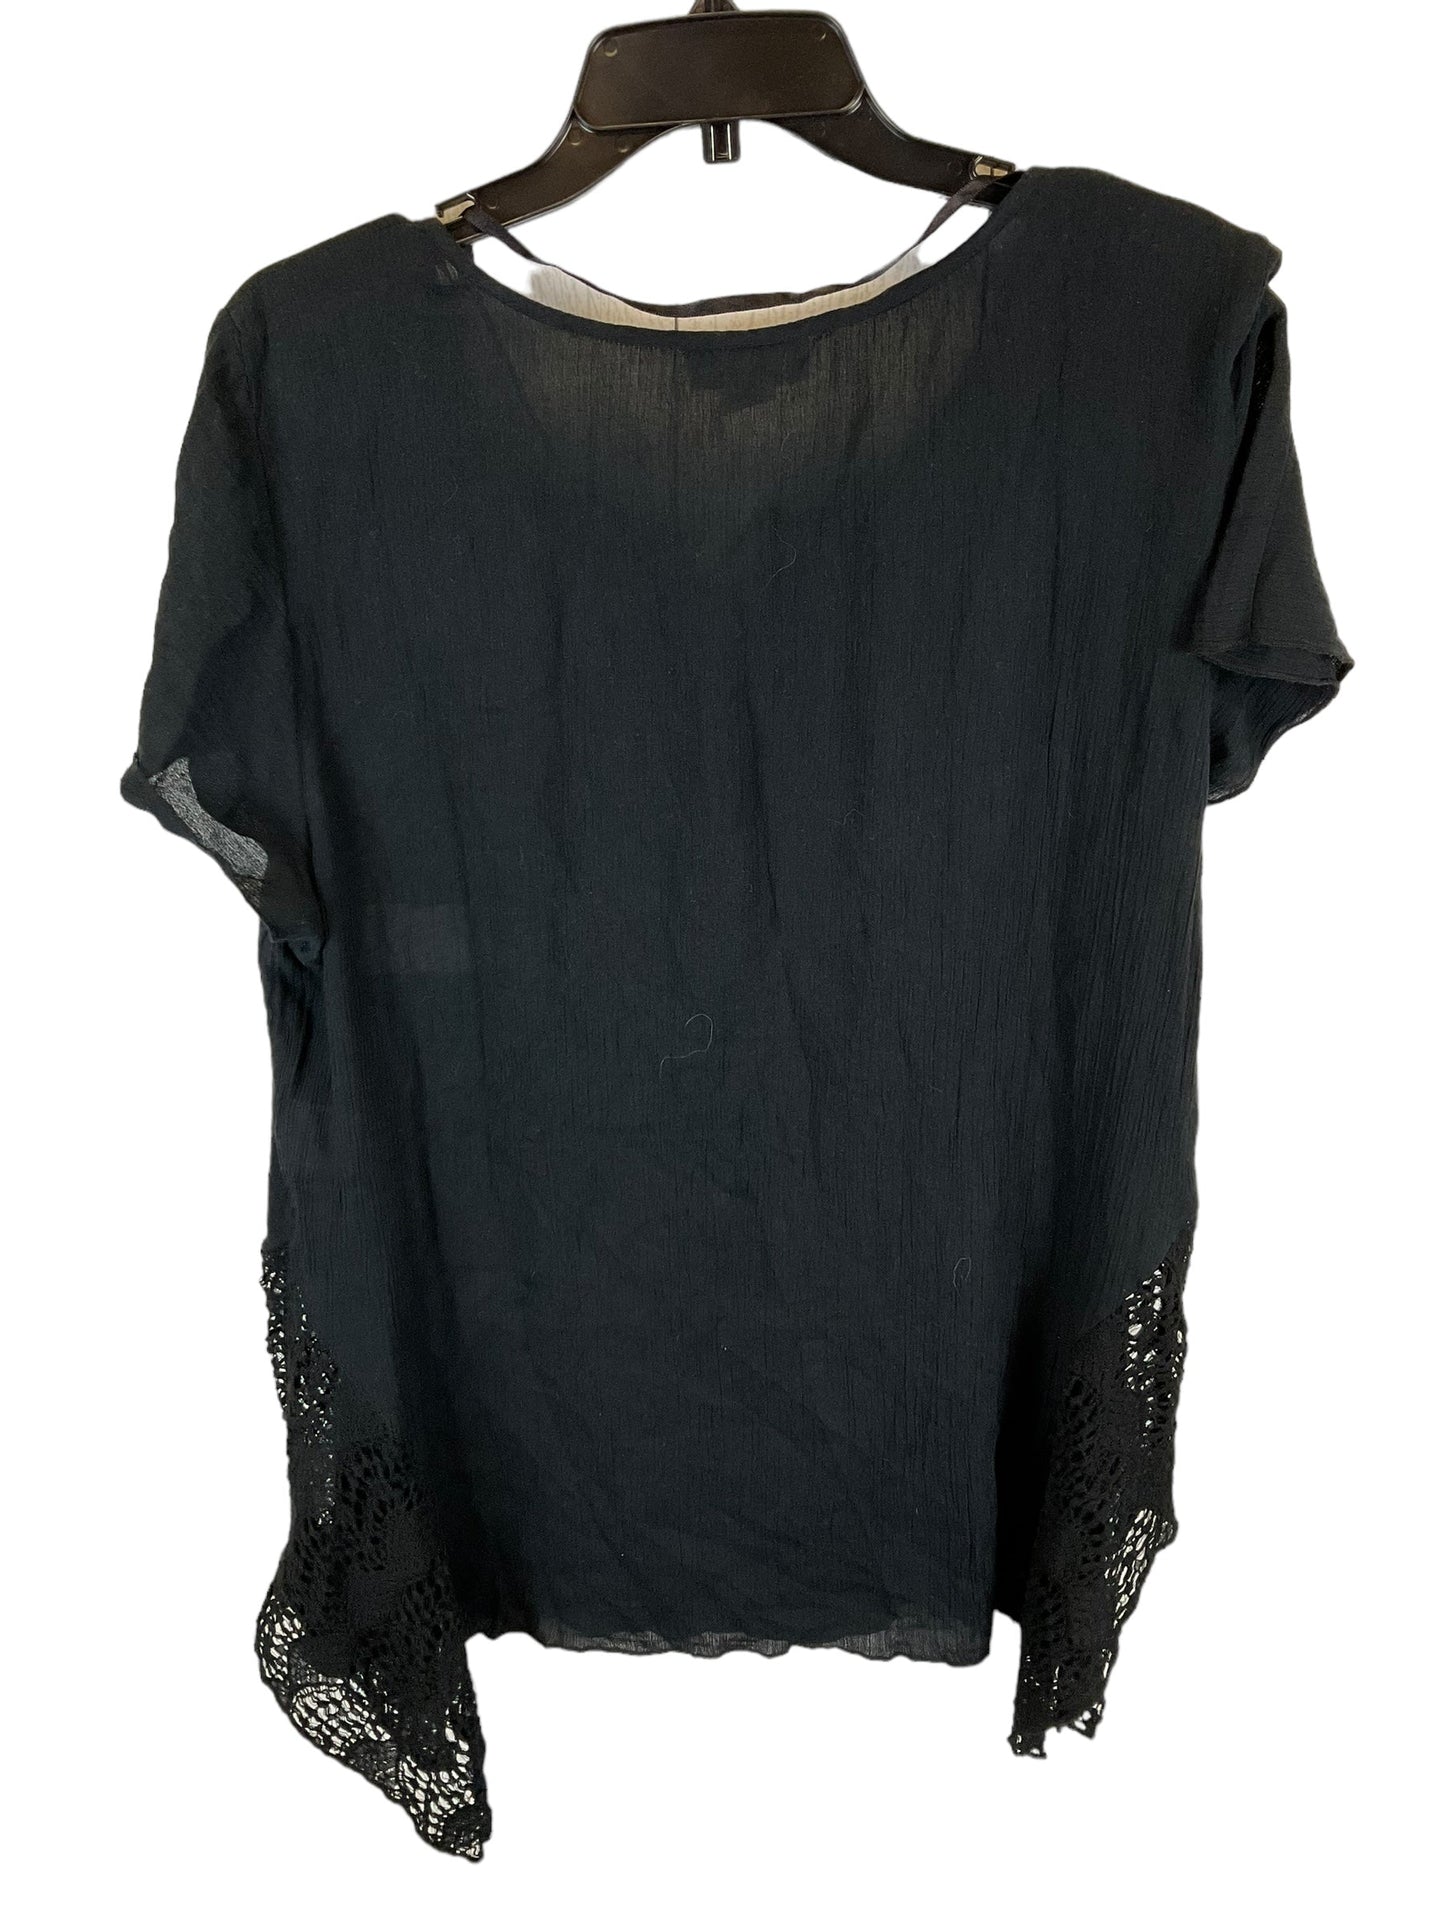 Black Top Short Sleeve Style And Company, Size Xl